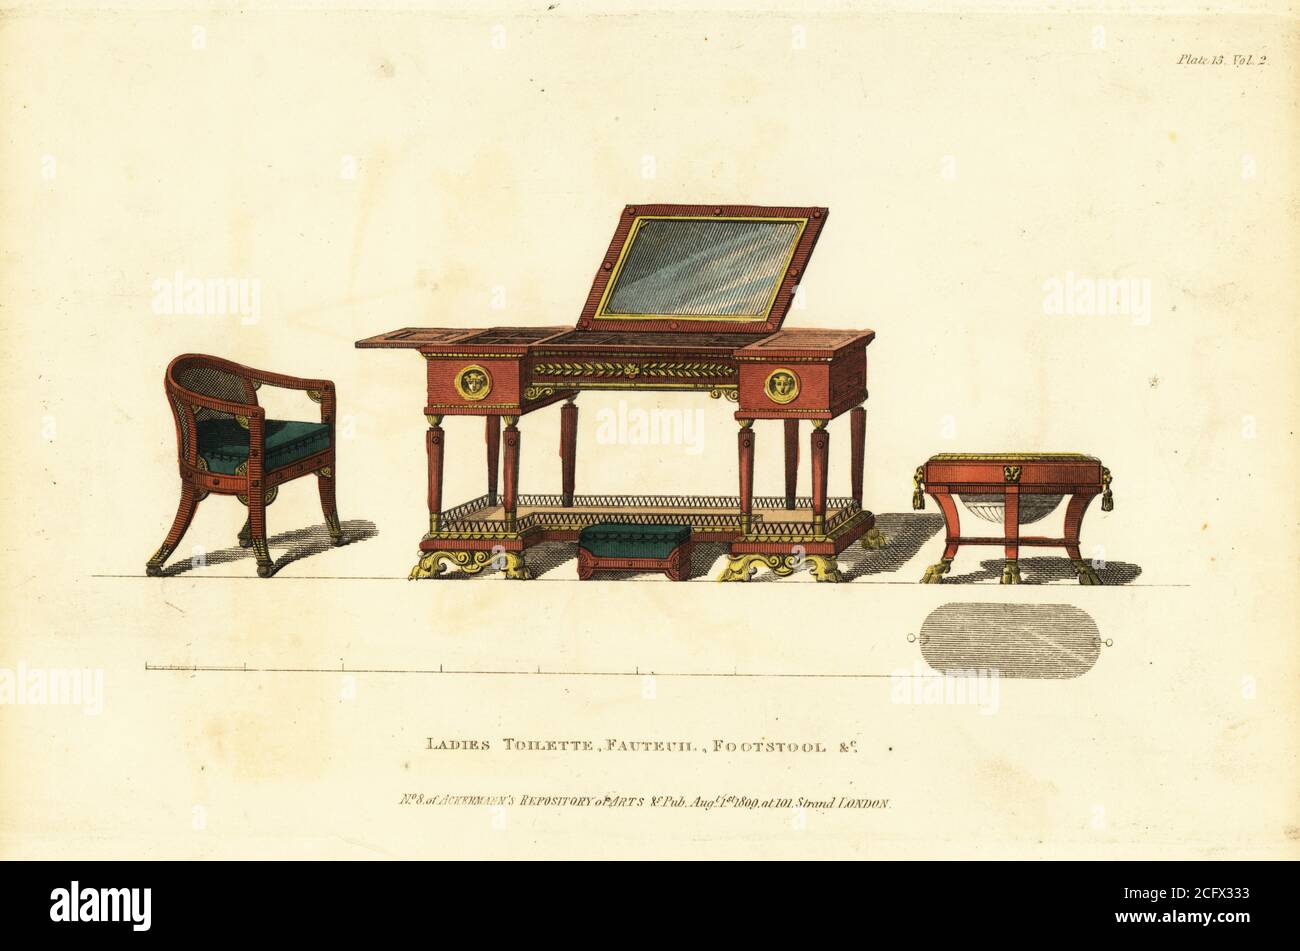 Ladies toilette, fauteuil, footstool, bidet, 1809. Lady’s dressing table in mahogany with a large mirror, ottoman footstool covered in green morocco leather, matching armchair, and chamber bath for the promotion of health. Handcoloured copperplate engraving from The Upholsterer's and Cabinet-Maker's Repository consisting of seventy-six designs of modern and fashionable furniture, Rudolph Ackermann, London, 1830. Stock Photo